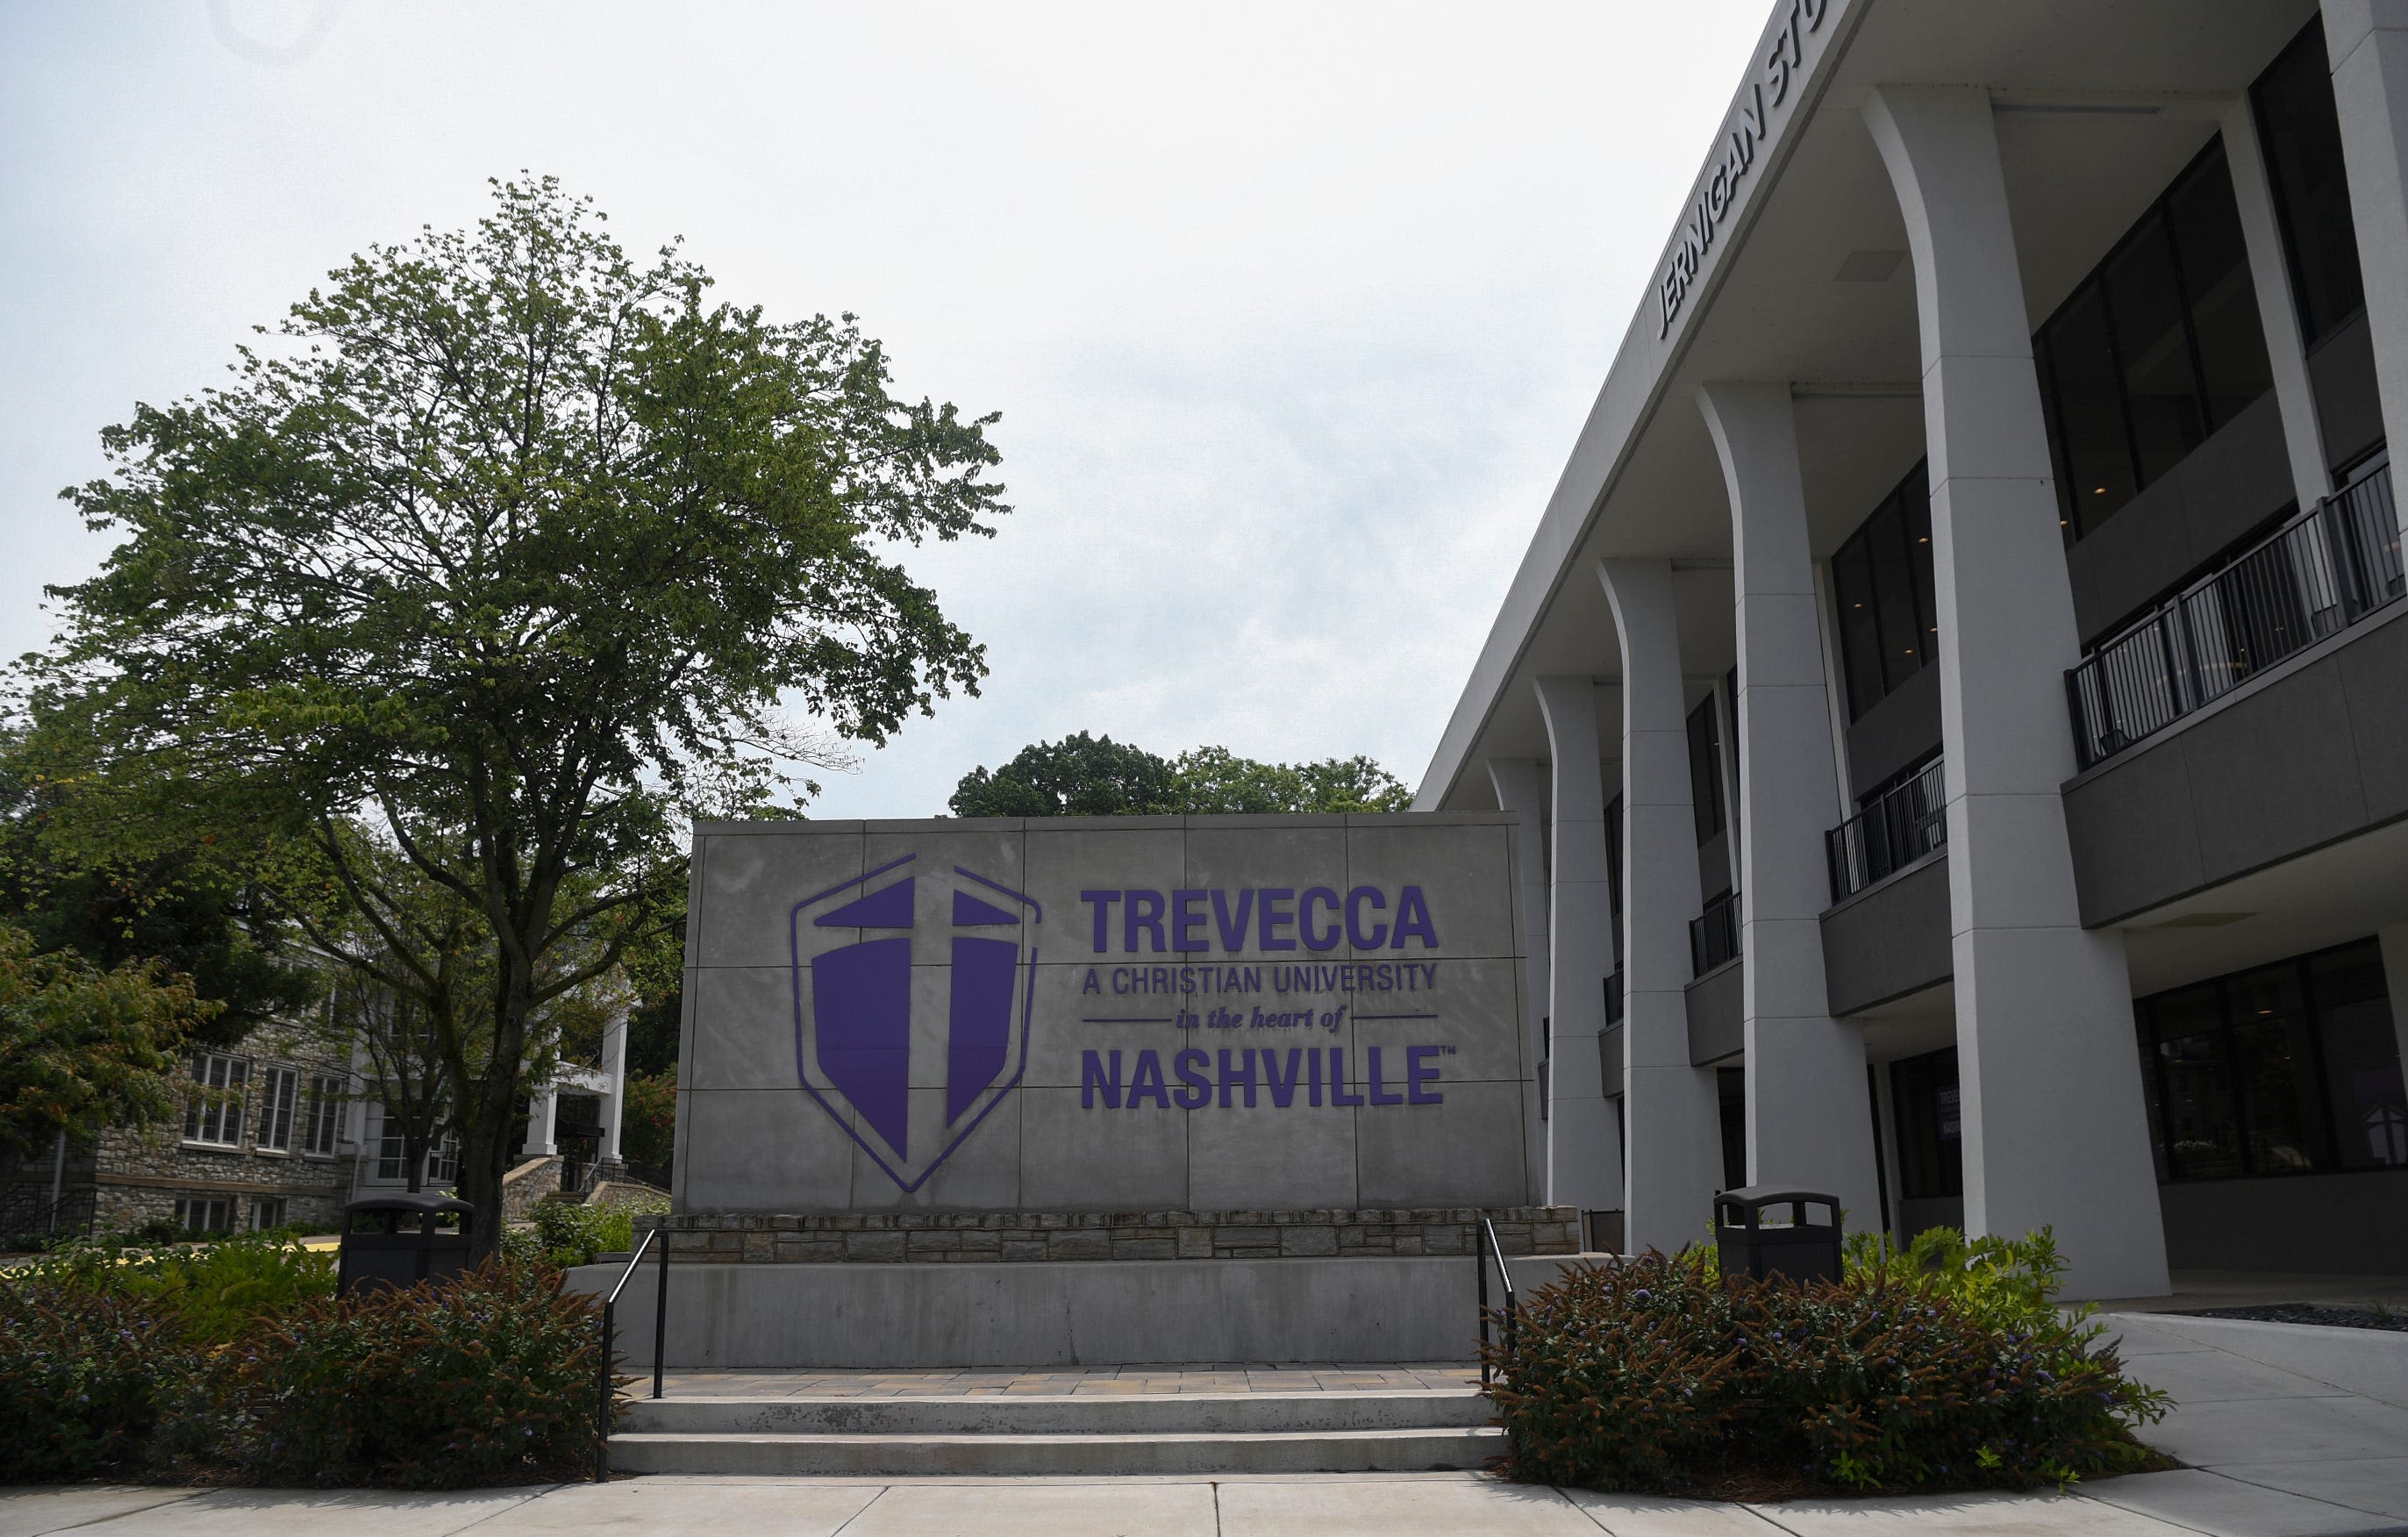 Trevecca Nazarene University is taking students from a closed sister school. Here’s why.